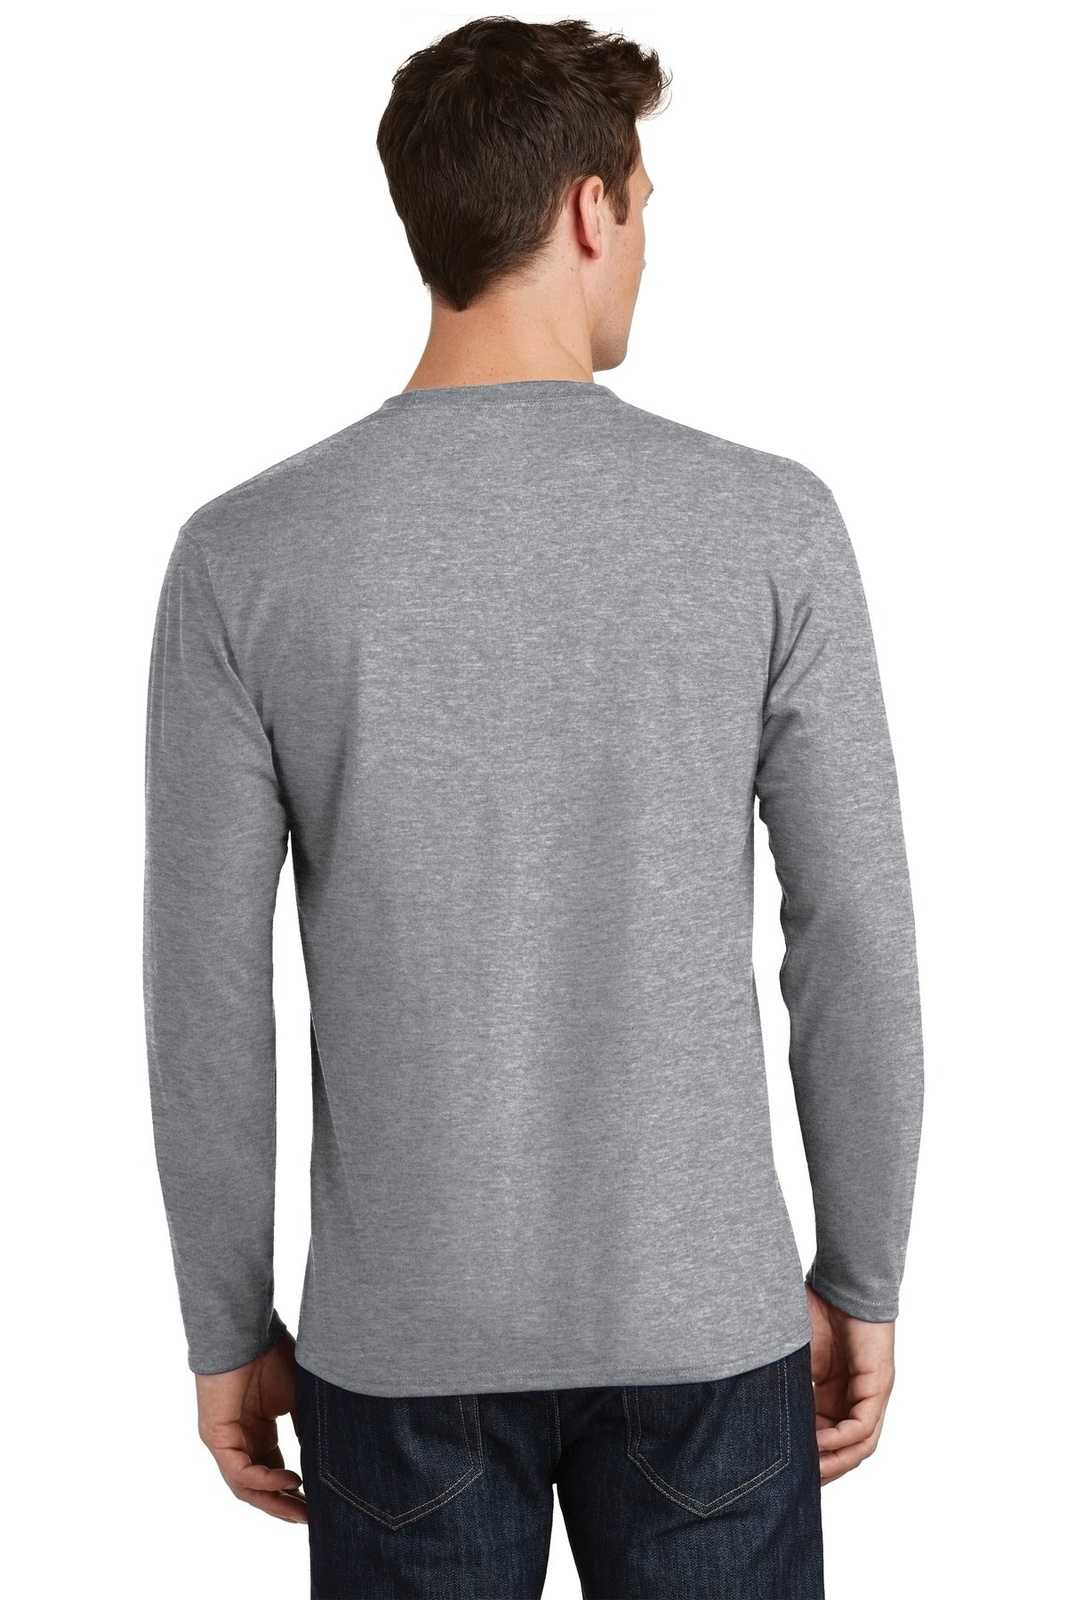 Port &amp; Company PC450LS Long Sleeve Fan Favorite Tee - Athletic Heather - HIT a Double - 2